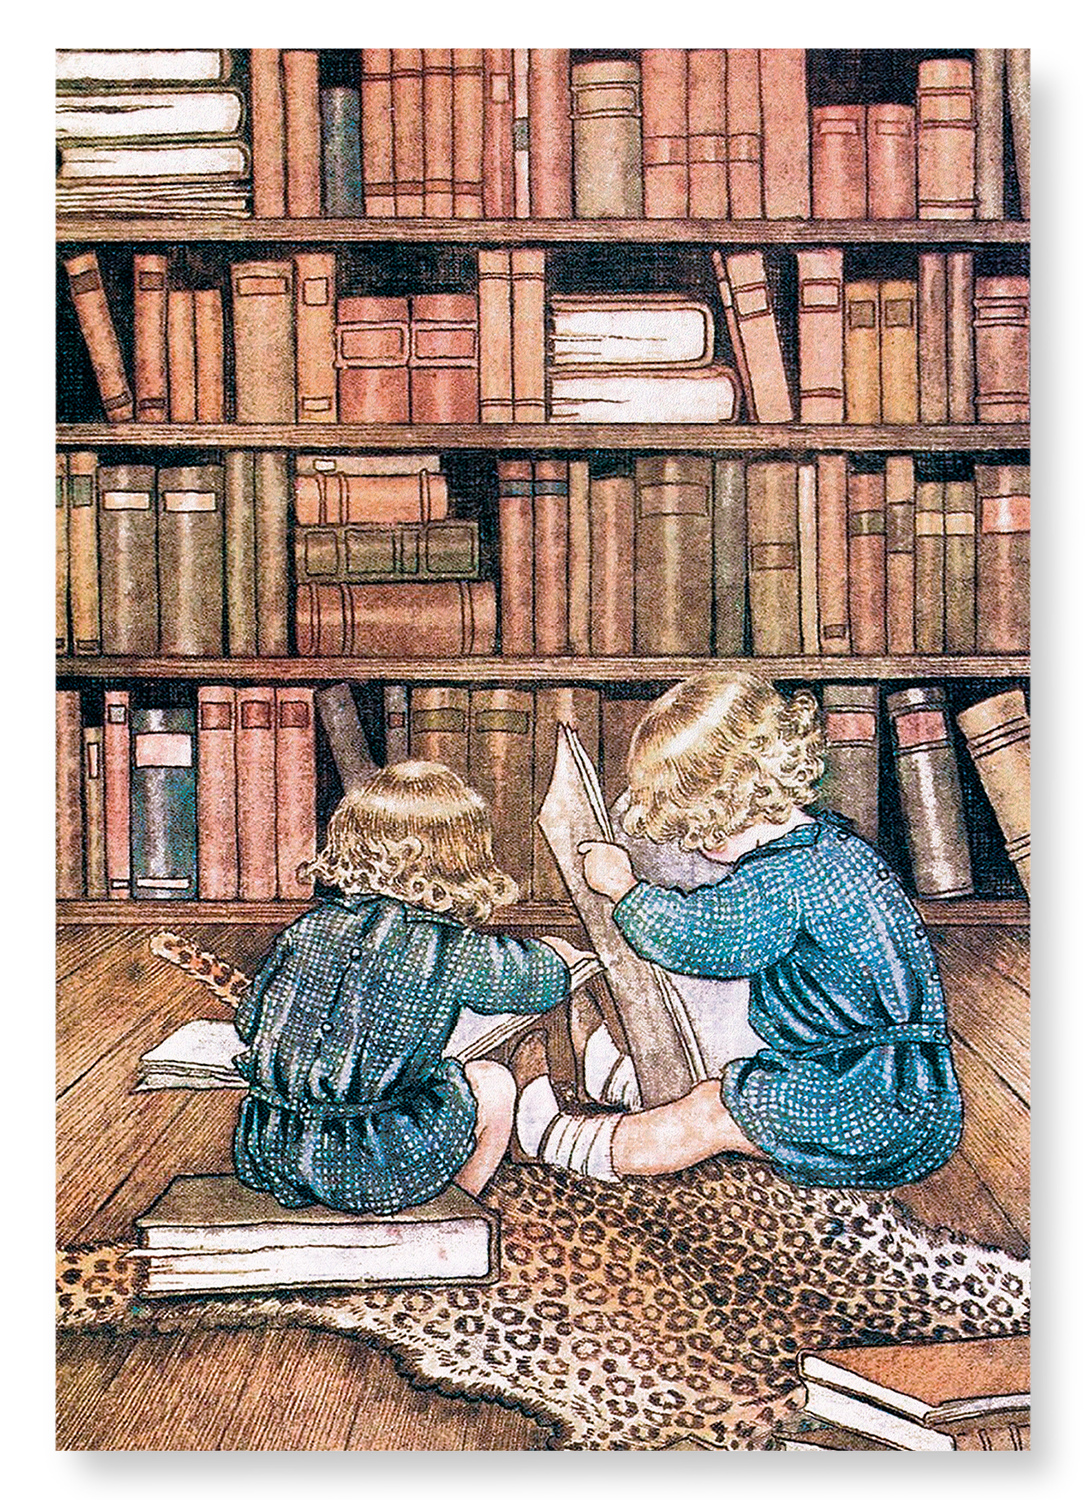 BOOKWORMS BY OUTHWAITE